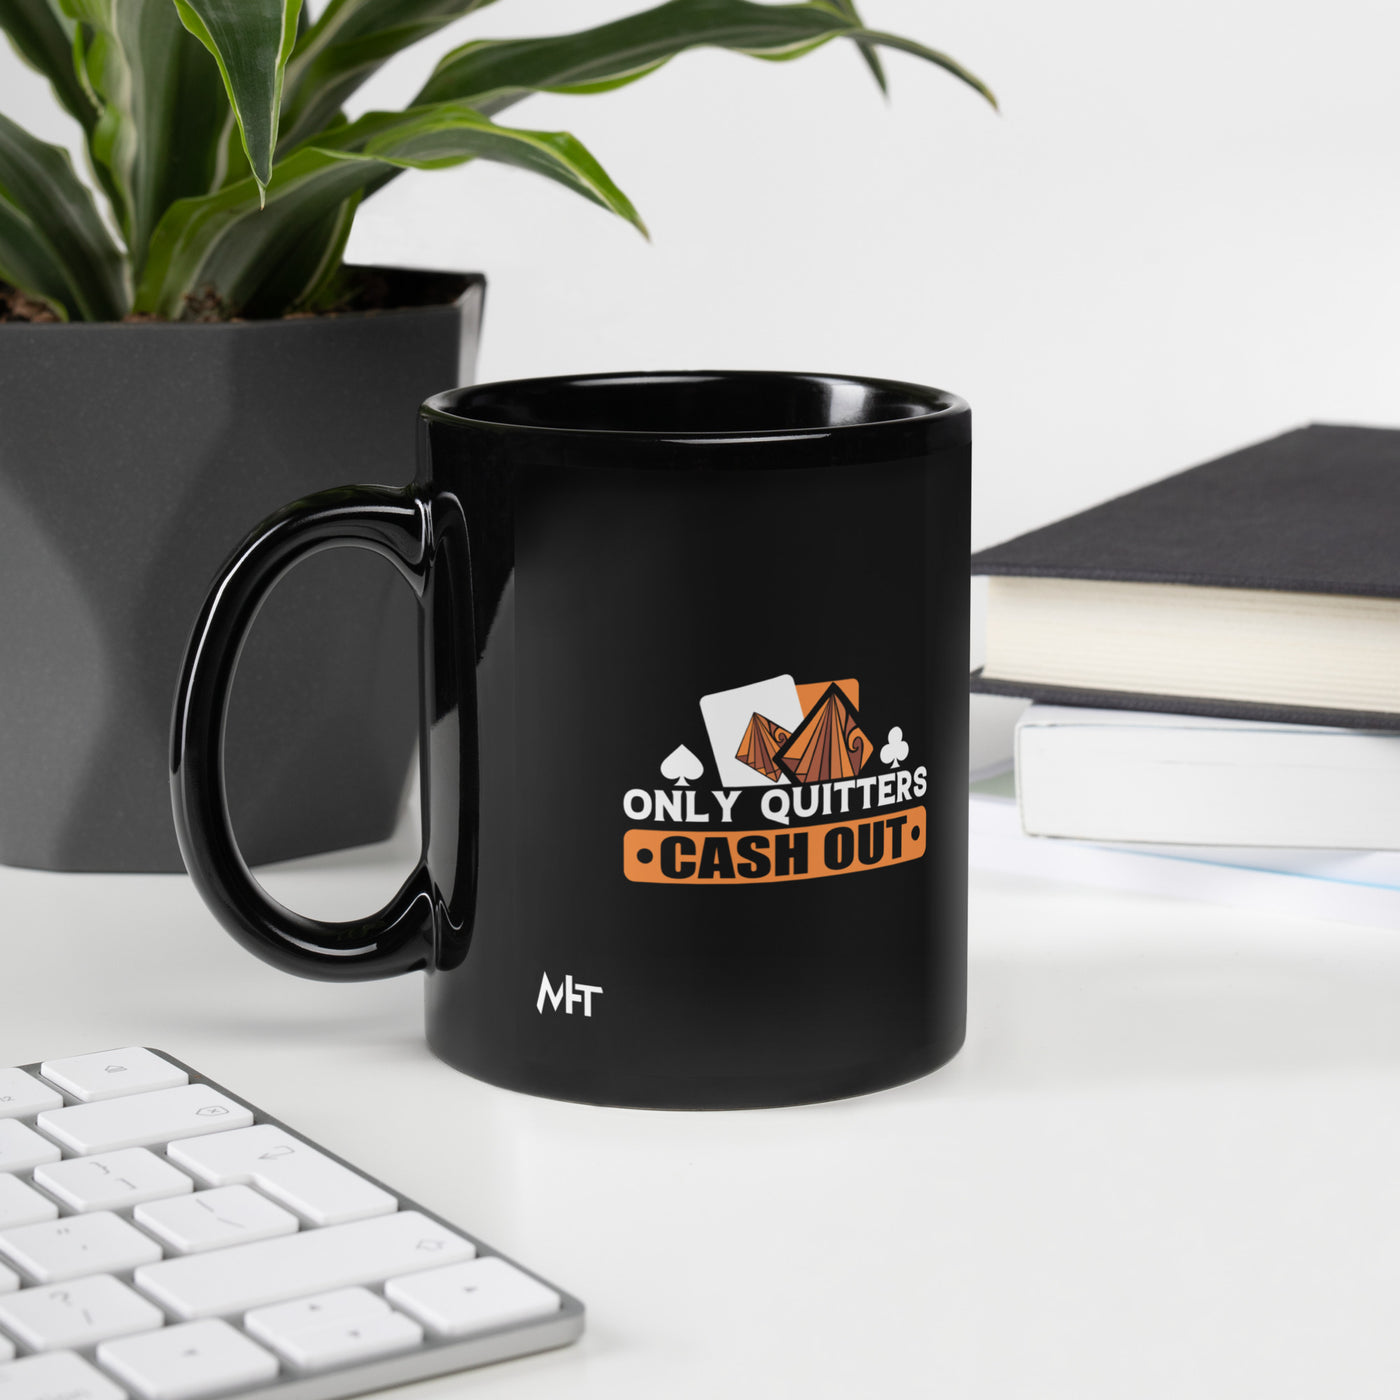 Only Quitters Cash Out - Black Glossy Mug